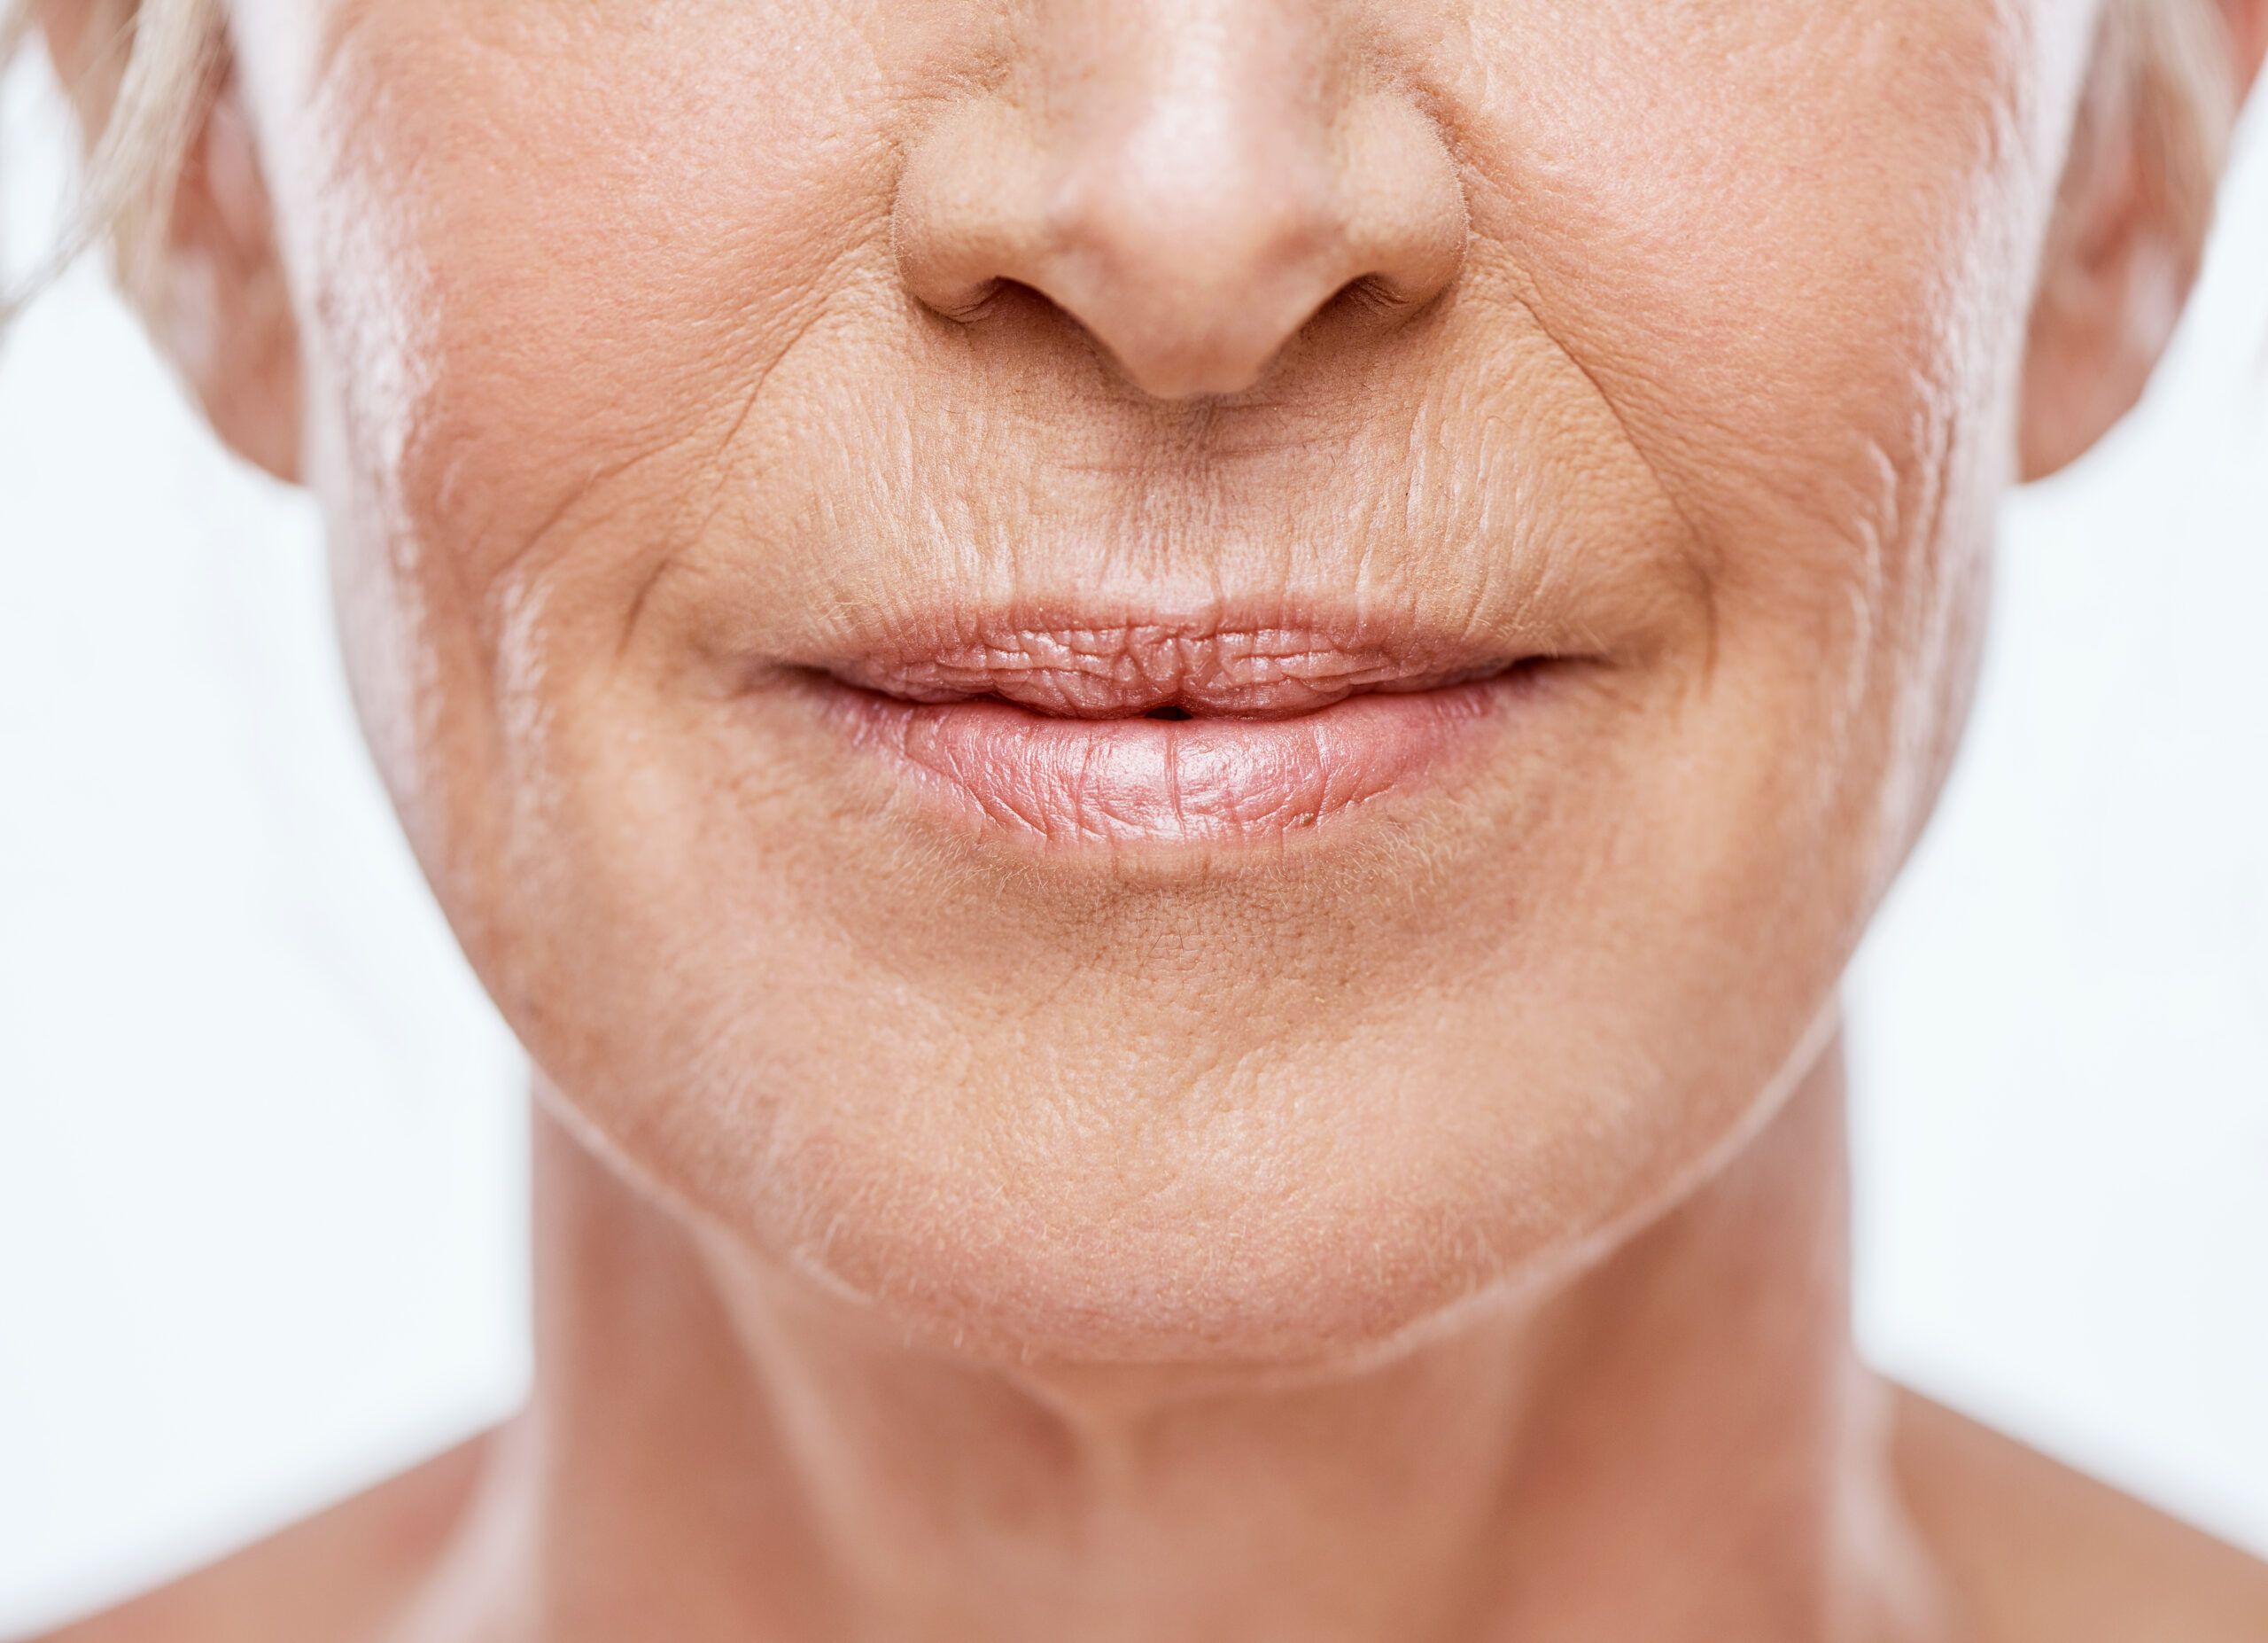 How to get rid of wrinkles without injection?